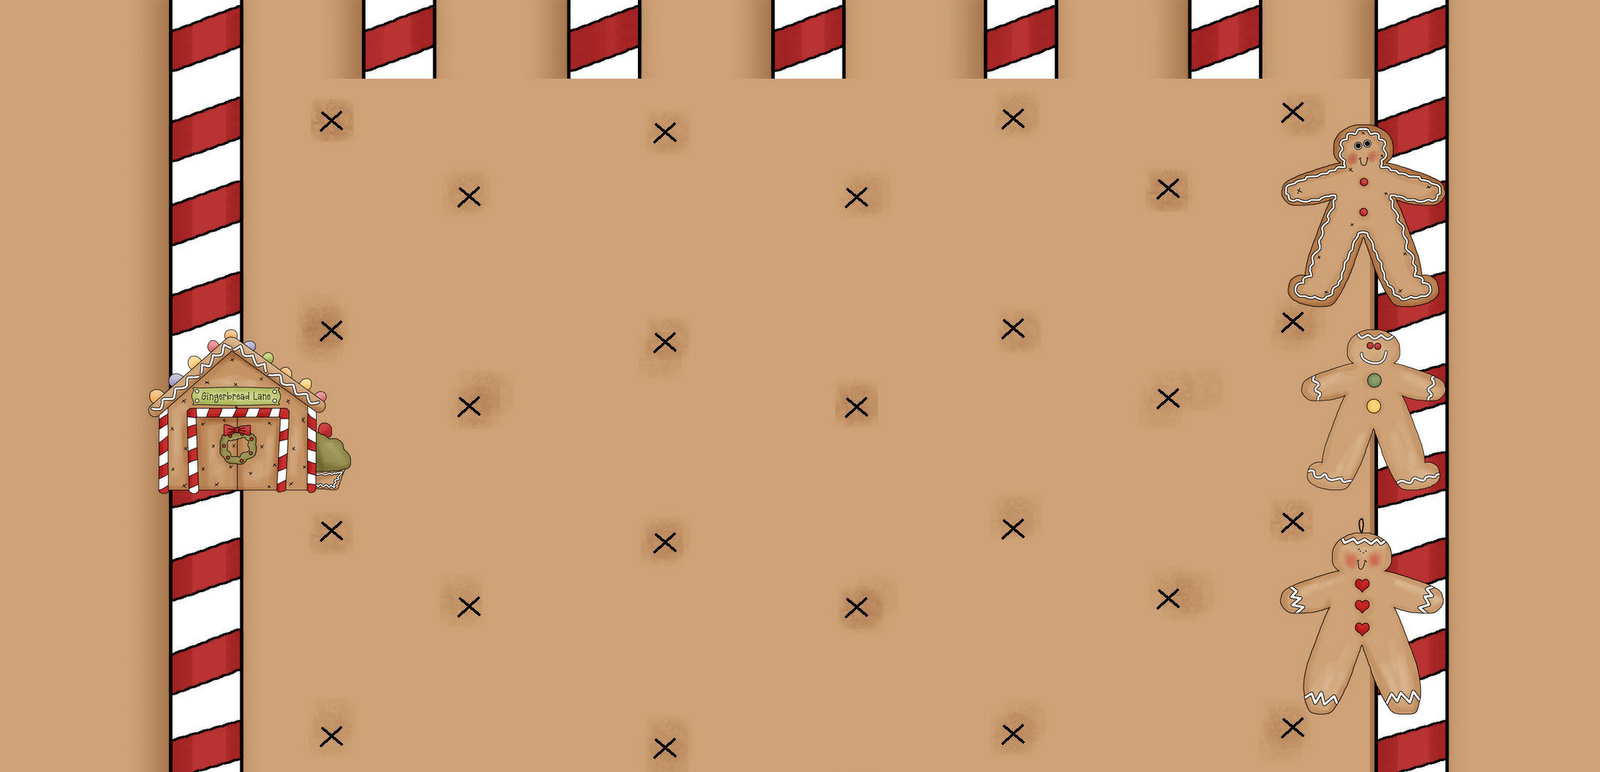 And New Background For Christmas Called Gingerbread House